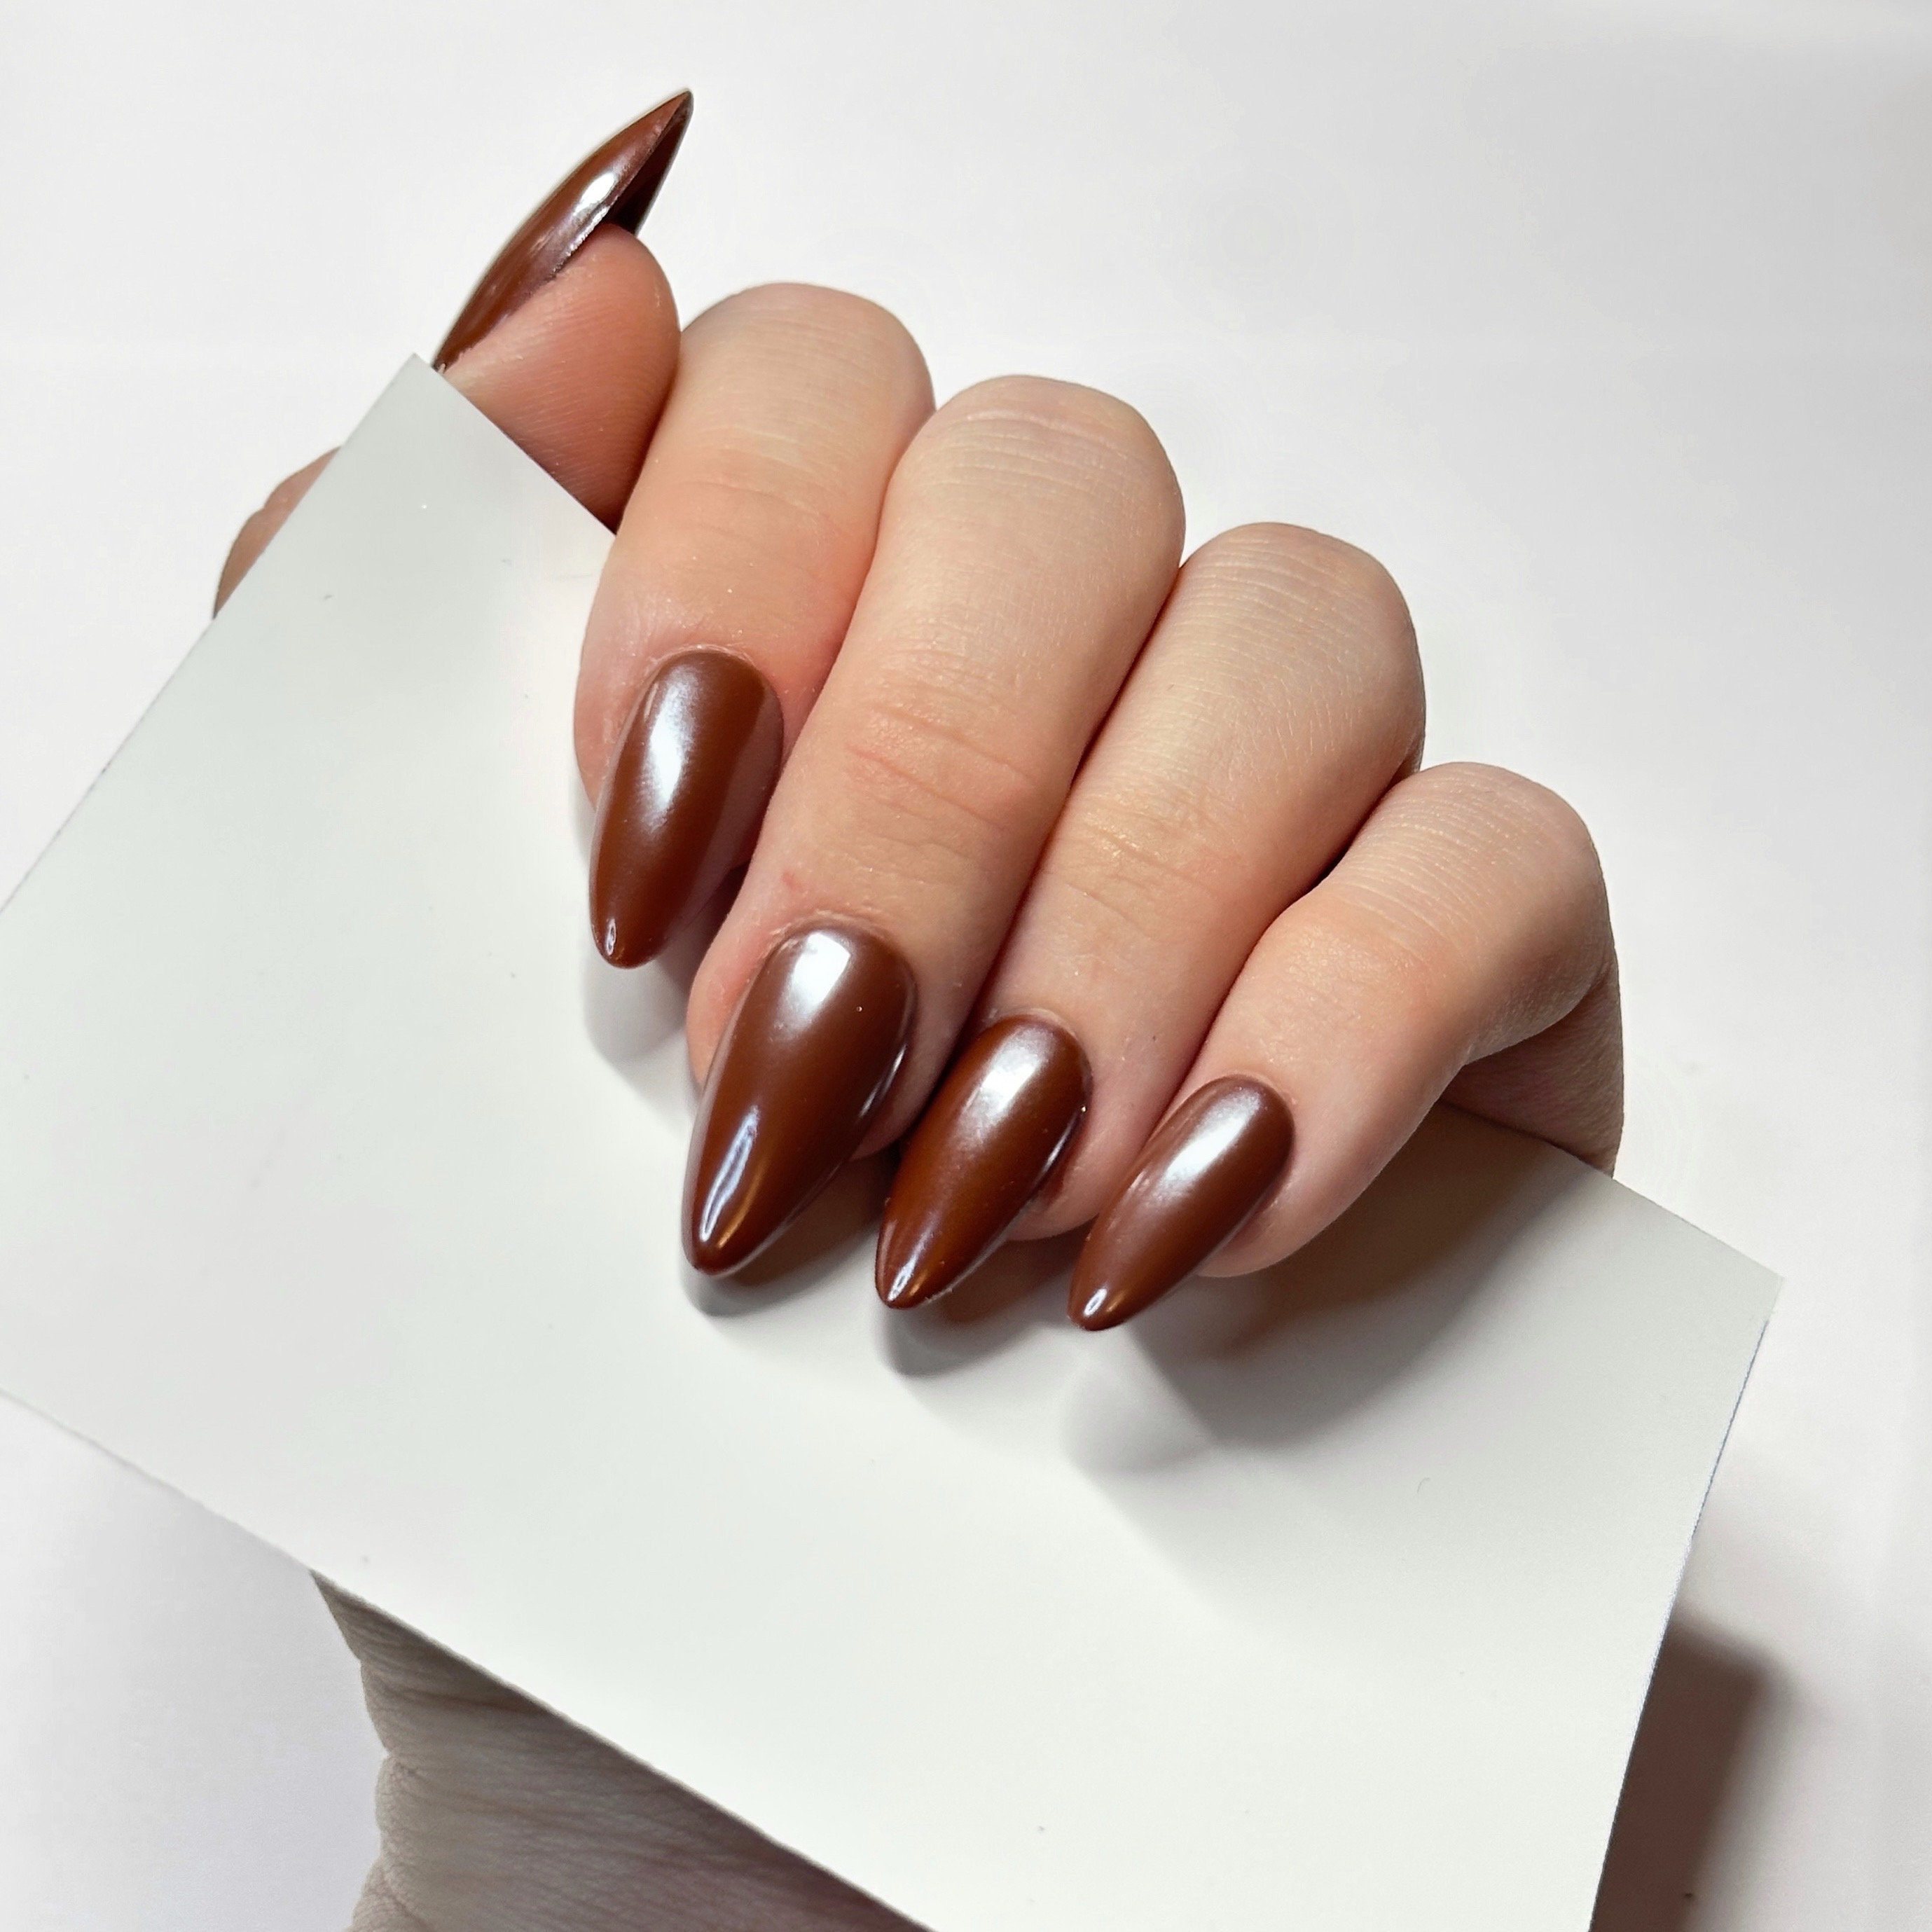 Dark At-Home Manicure  How To Prep and Paint Your Nails 